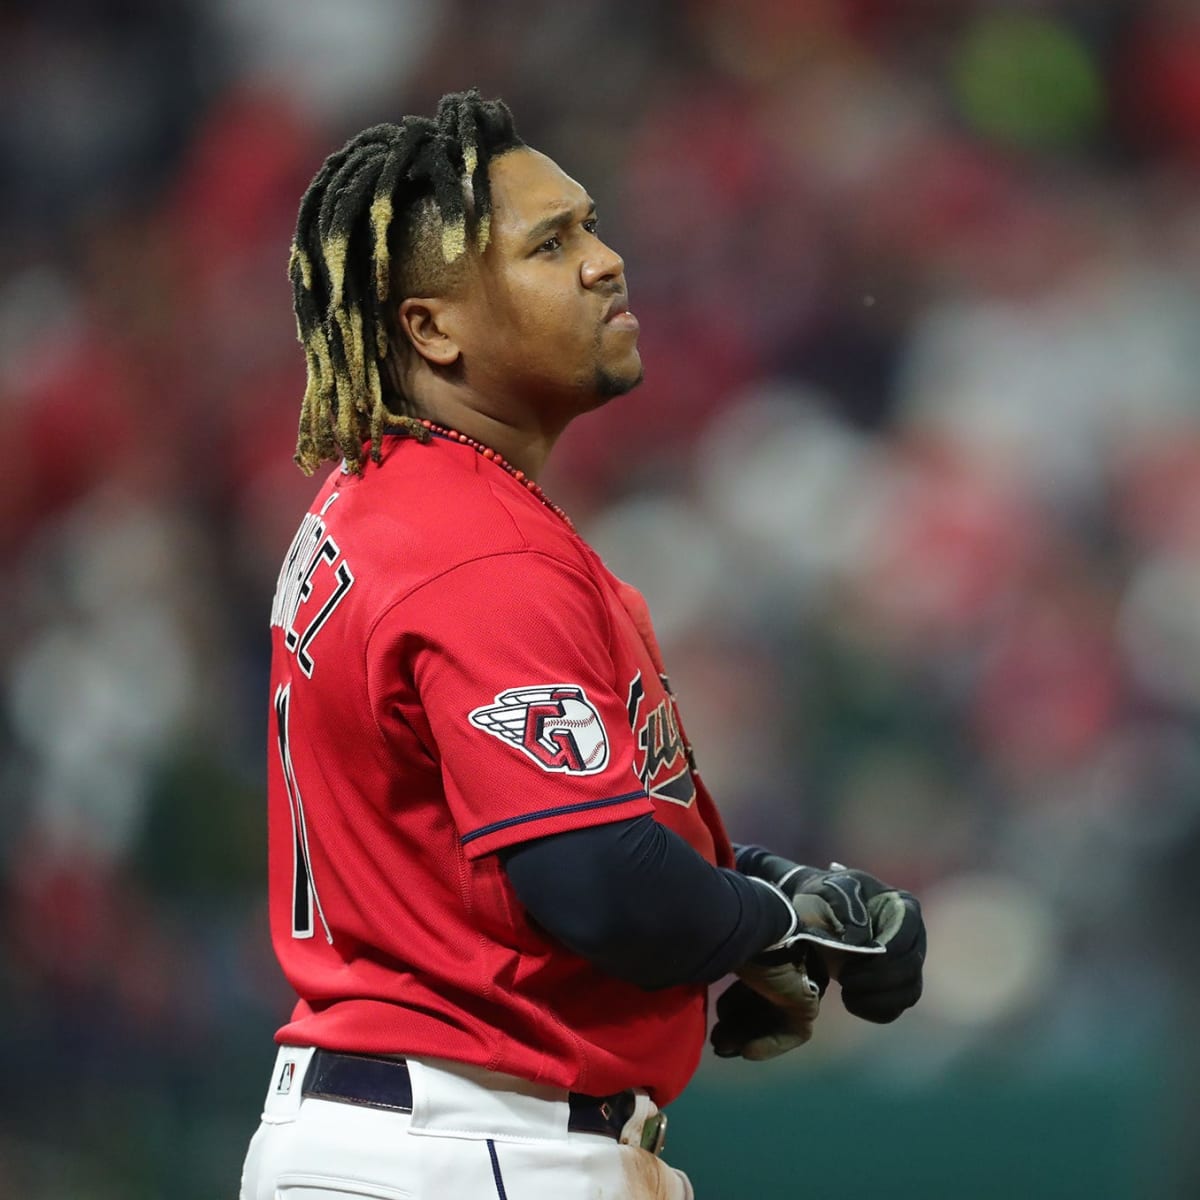 Behind the loose-fitting helmet: Who, exactly, is Jose Ramirez? 